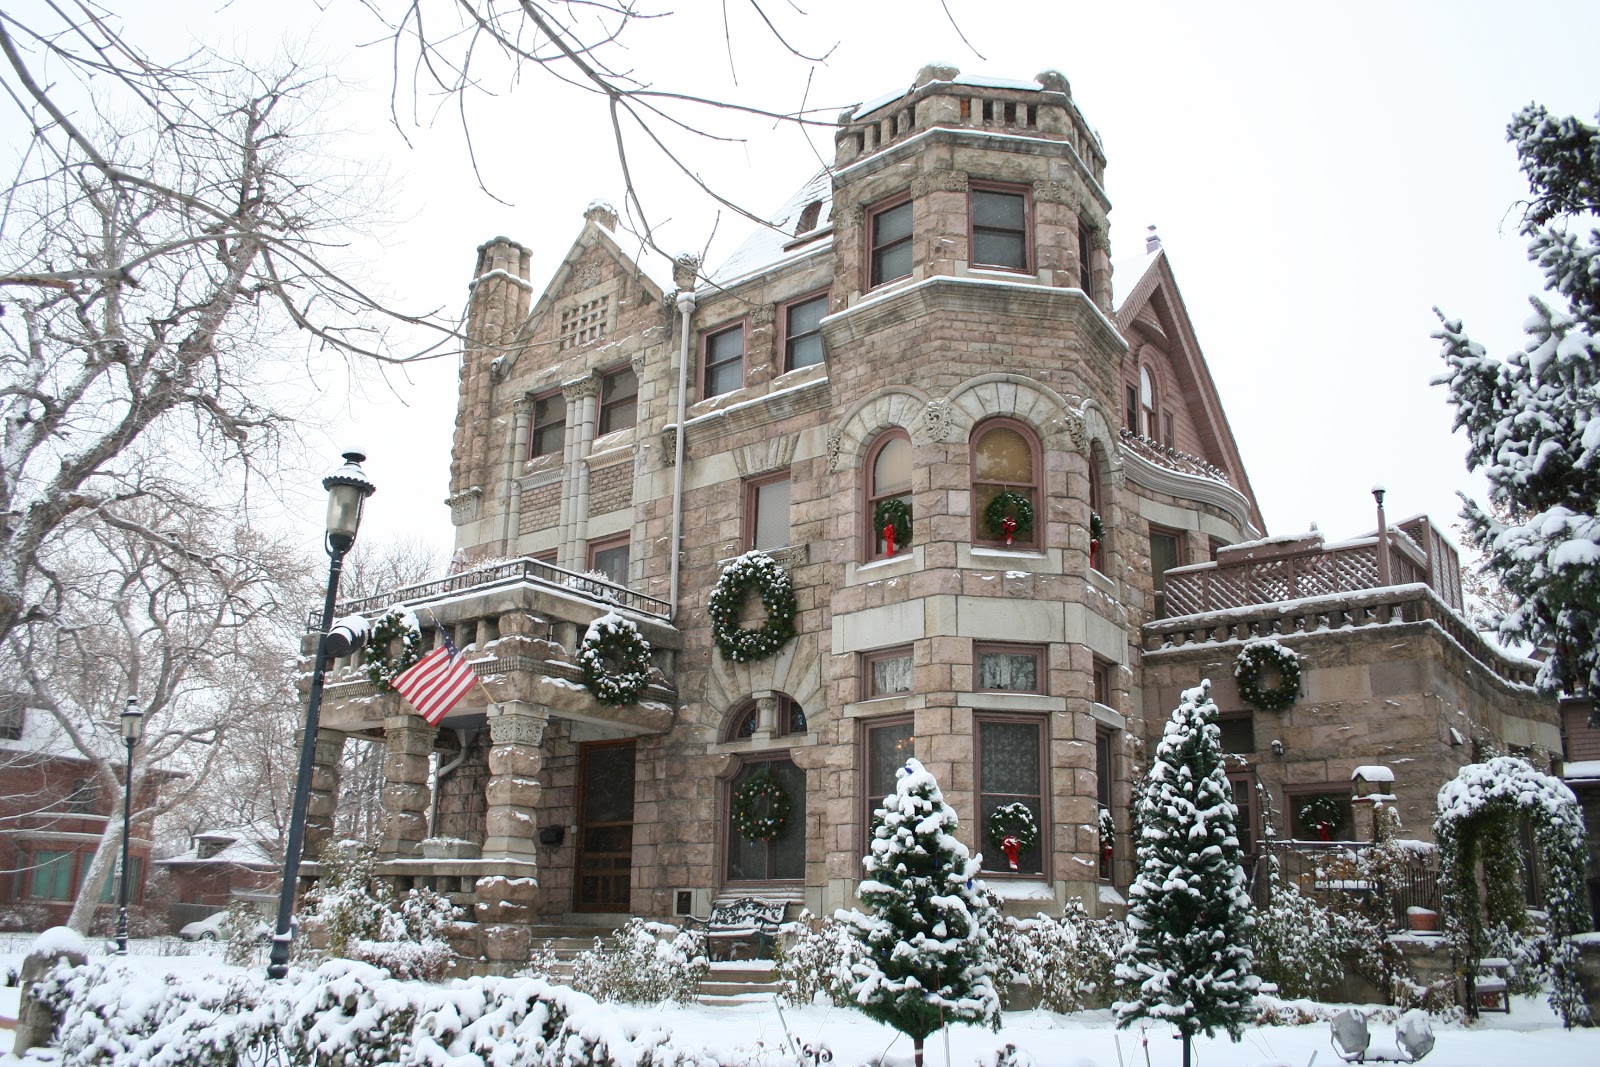 Castle Marne Bed and Breakfast: Victorian Holiday Home Tour, 3rd Annual